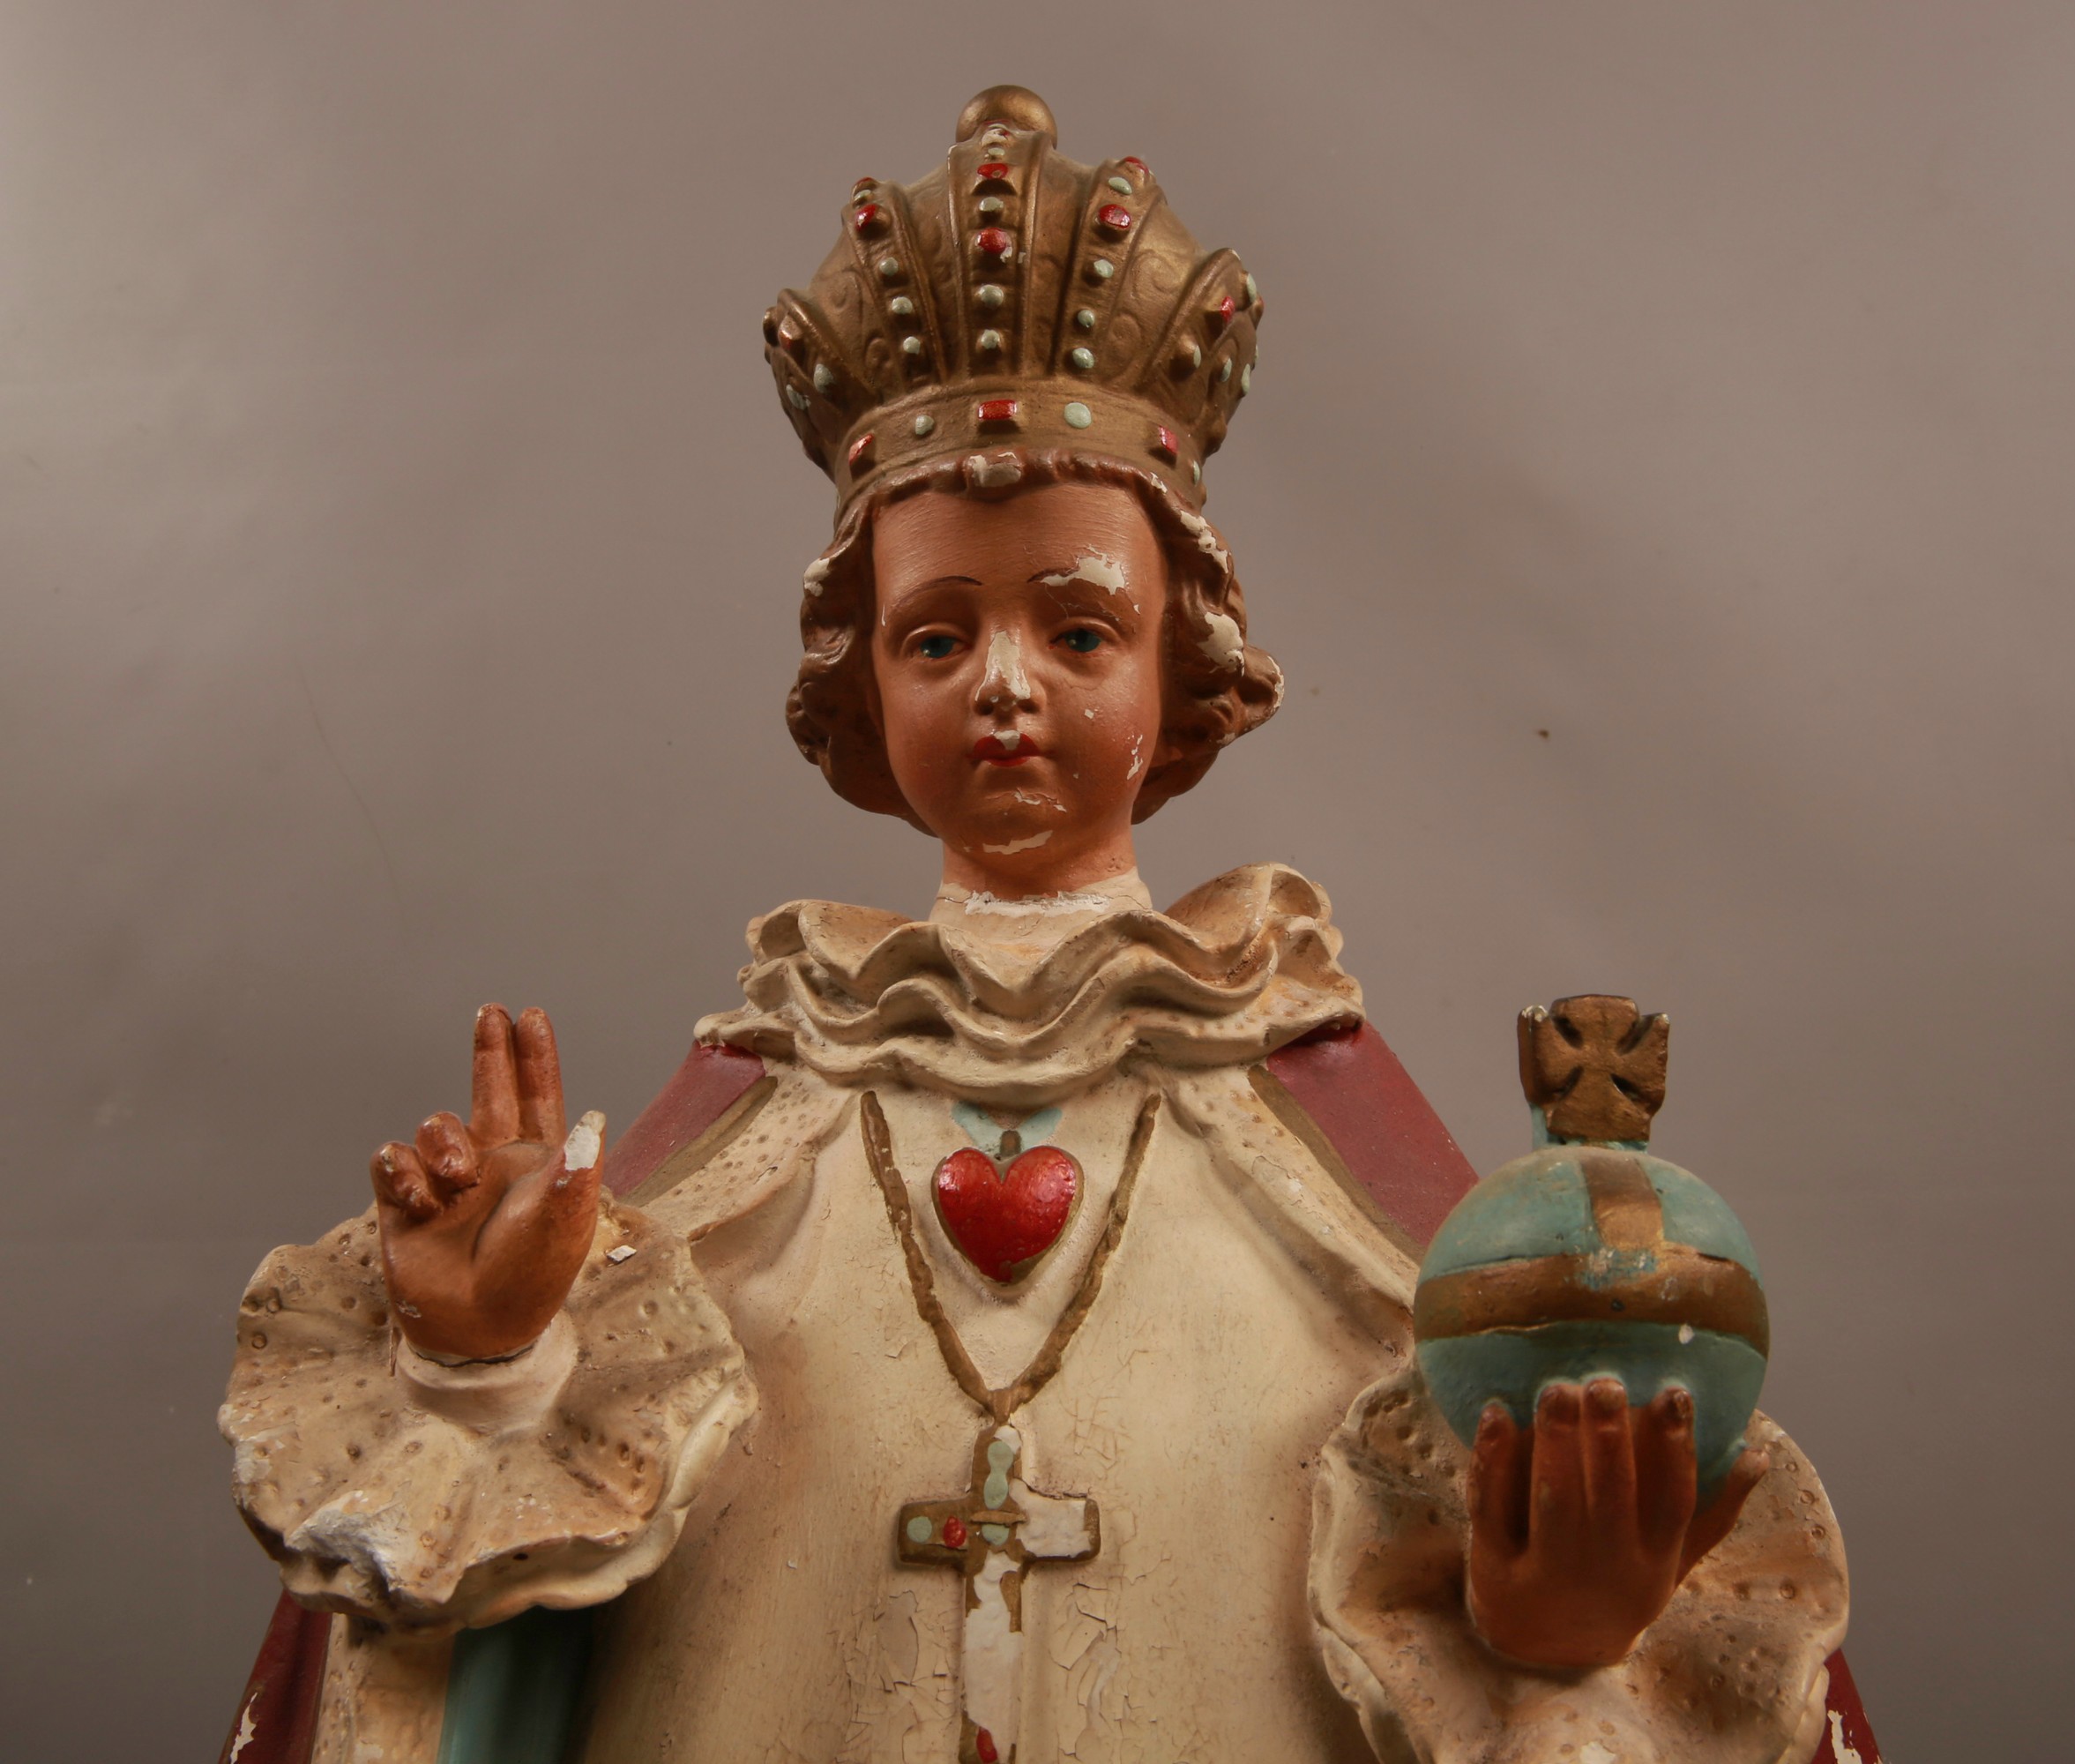 An Antique Large Religious Statue of the Child of Prague victorian 52cm Tall #80 - Image 2 of 7